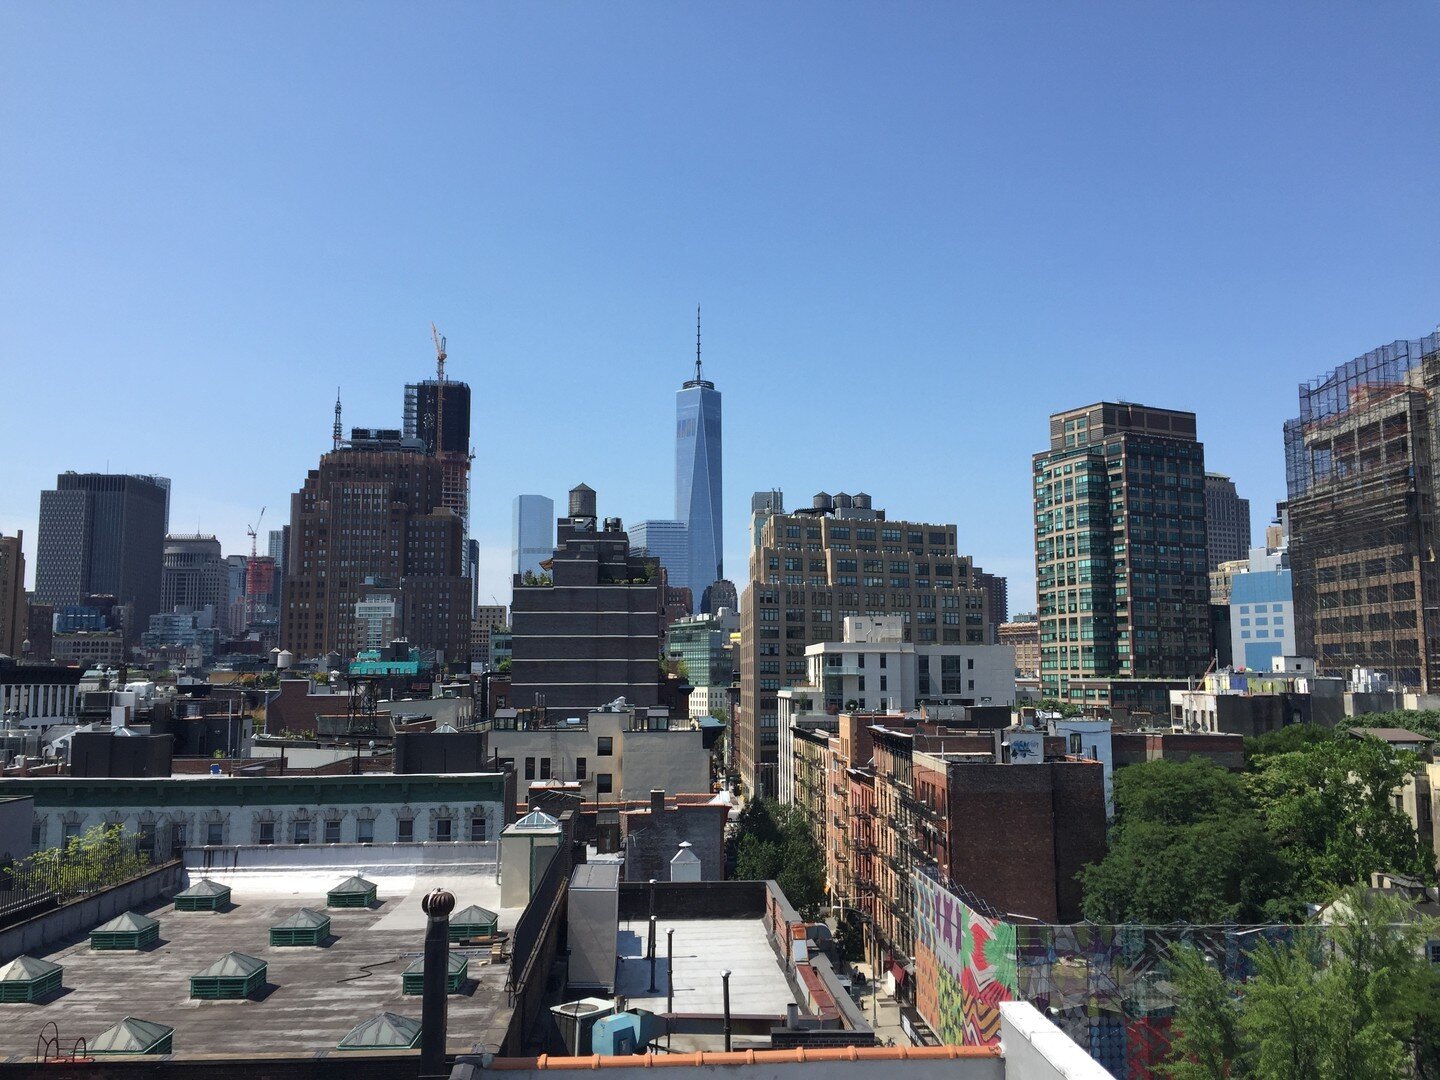 Freedom Tower &amp; clear blue skies! 😍
🏙️
🚕
🗝️
🥨
💁&zwj;♀️
#manhattan #nycviews #nycskyline #nycrealtor #nycrealestate #nycsun #midtown #views #realestatenyc #ilovenyc #nyc #skyscraper #nyclights #summertime #uptown #downtown #newyorkcity #city